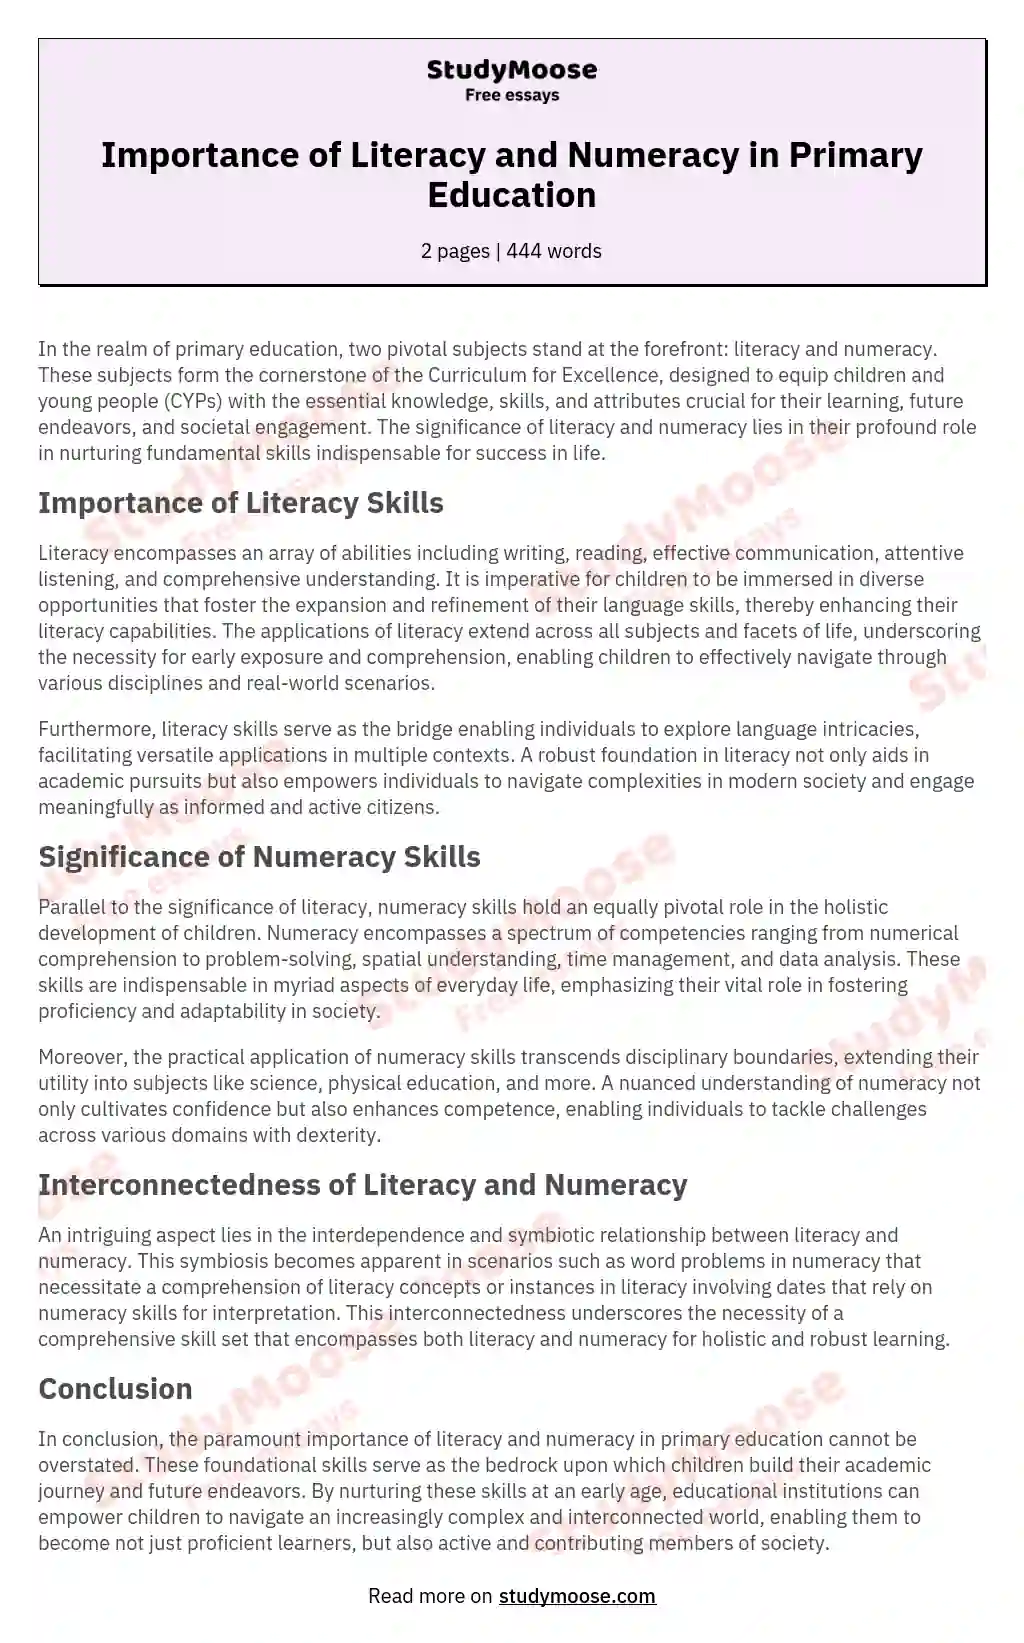 Importance of Literacy and Numeracy in Primary Education essay